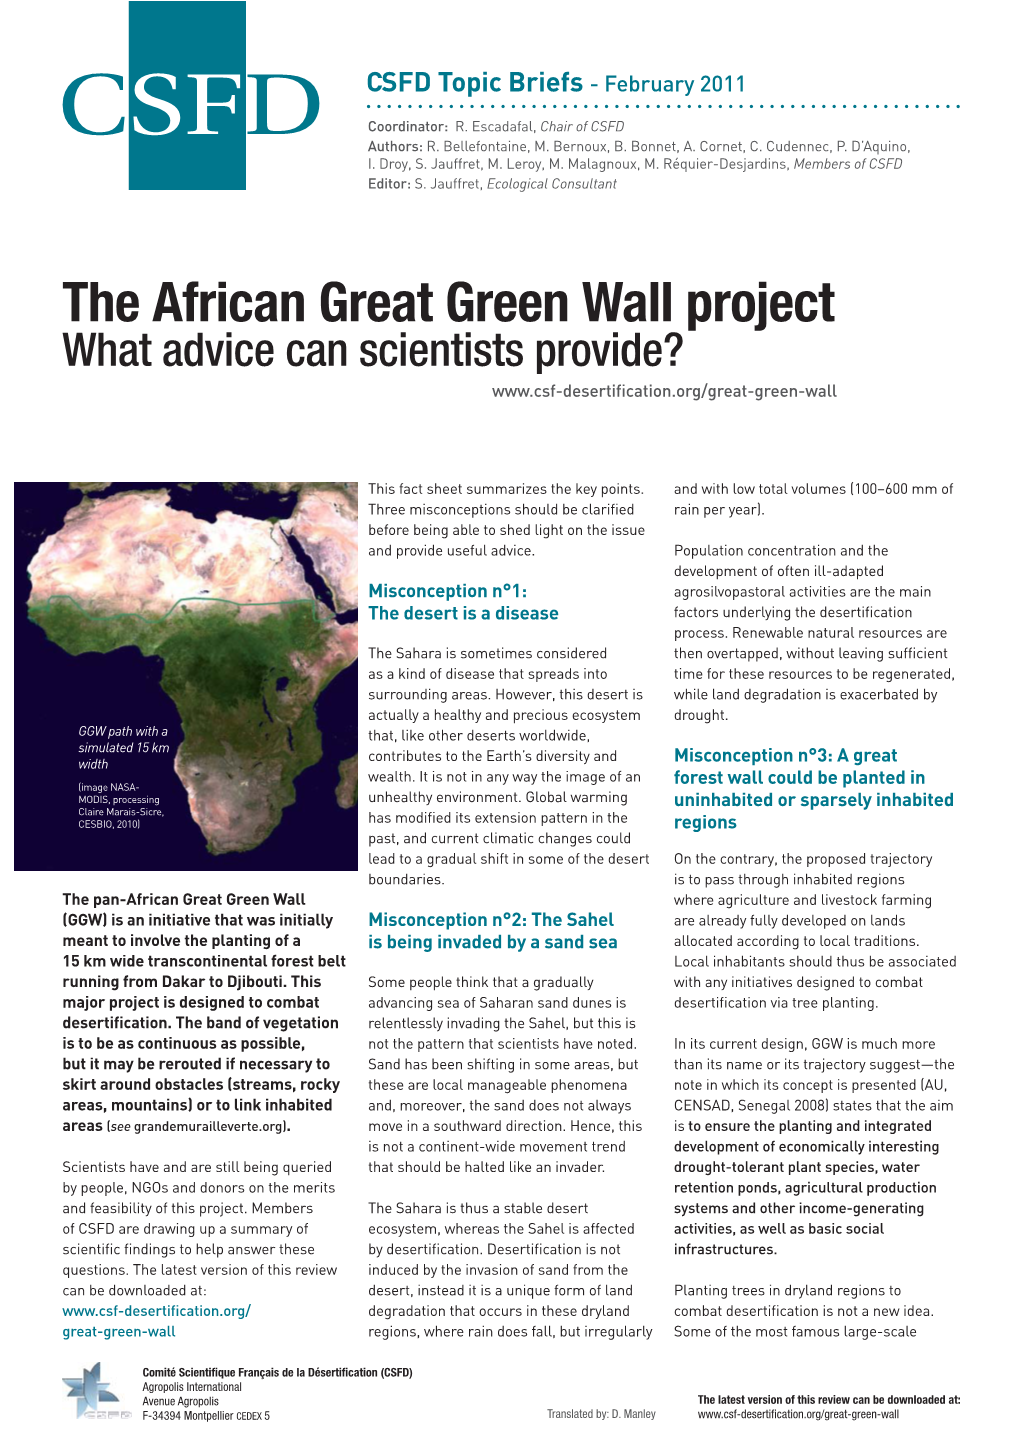 The African Great Green Wall Project What Advice Can Scientists Provide? Cation.Org/Great-Green-Wall